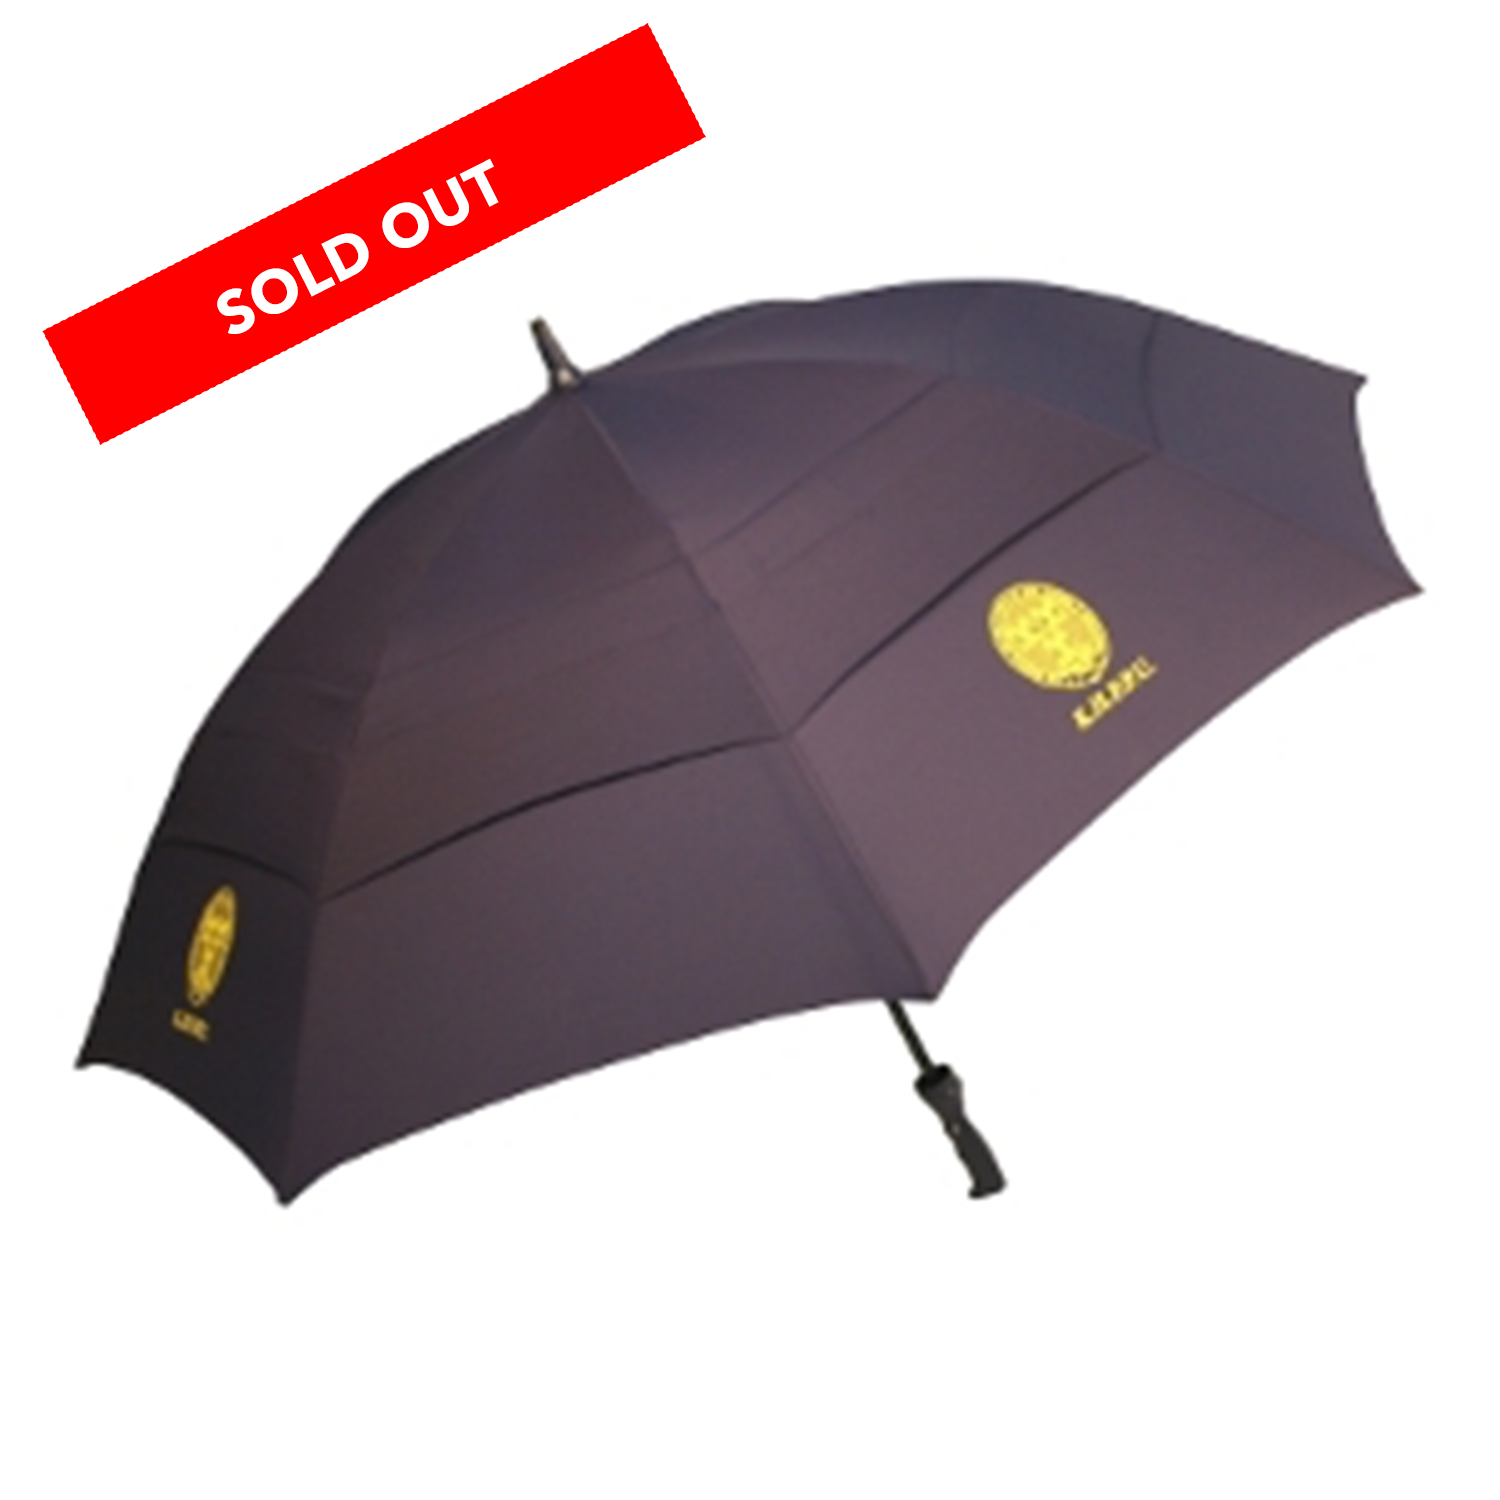 Umbrella sold out